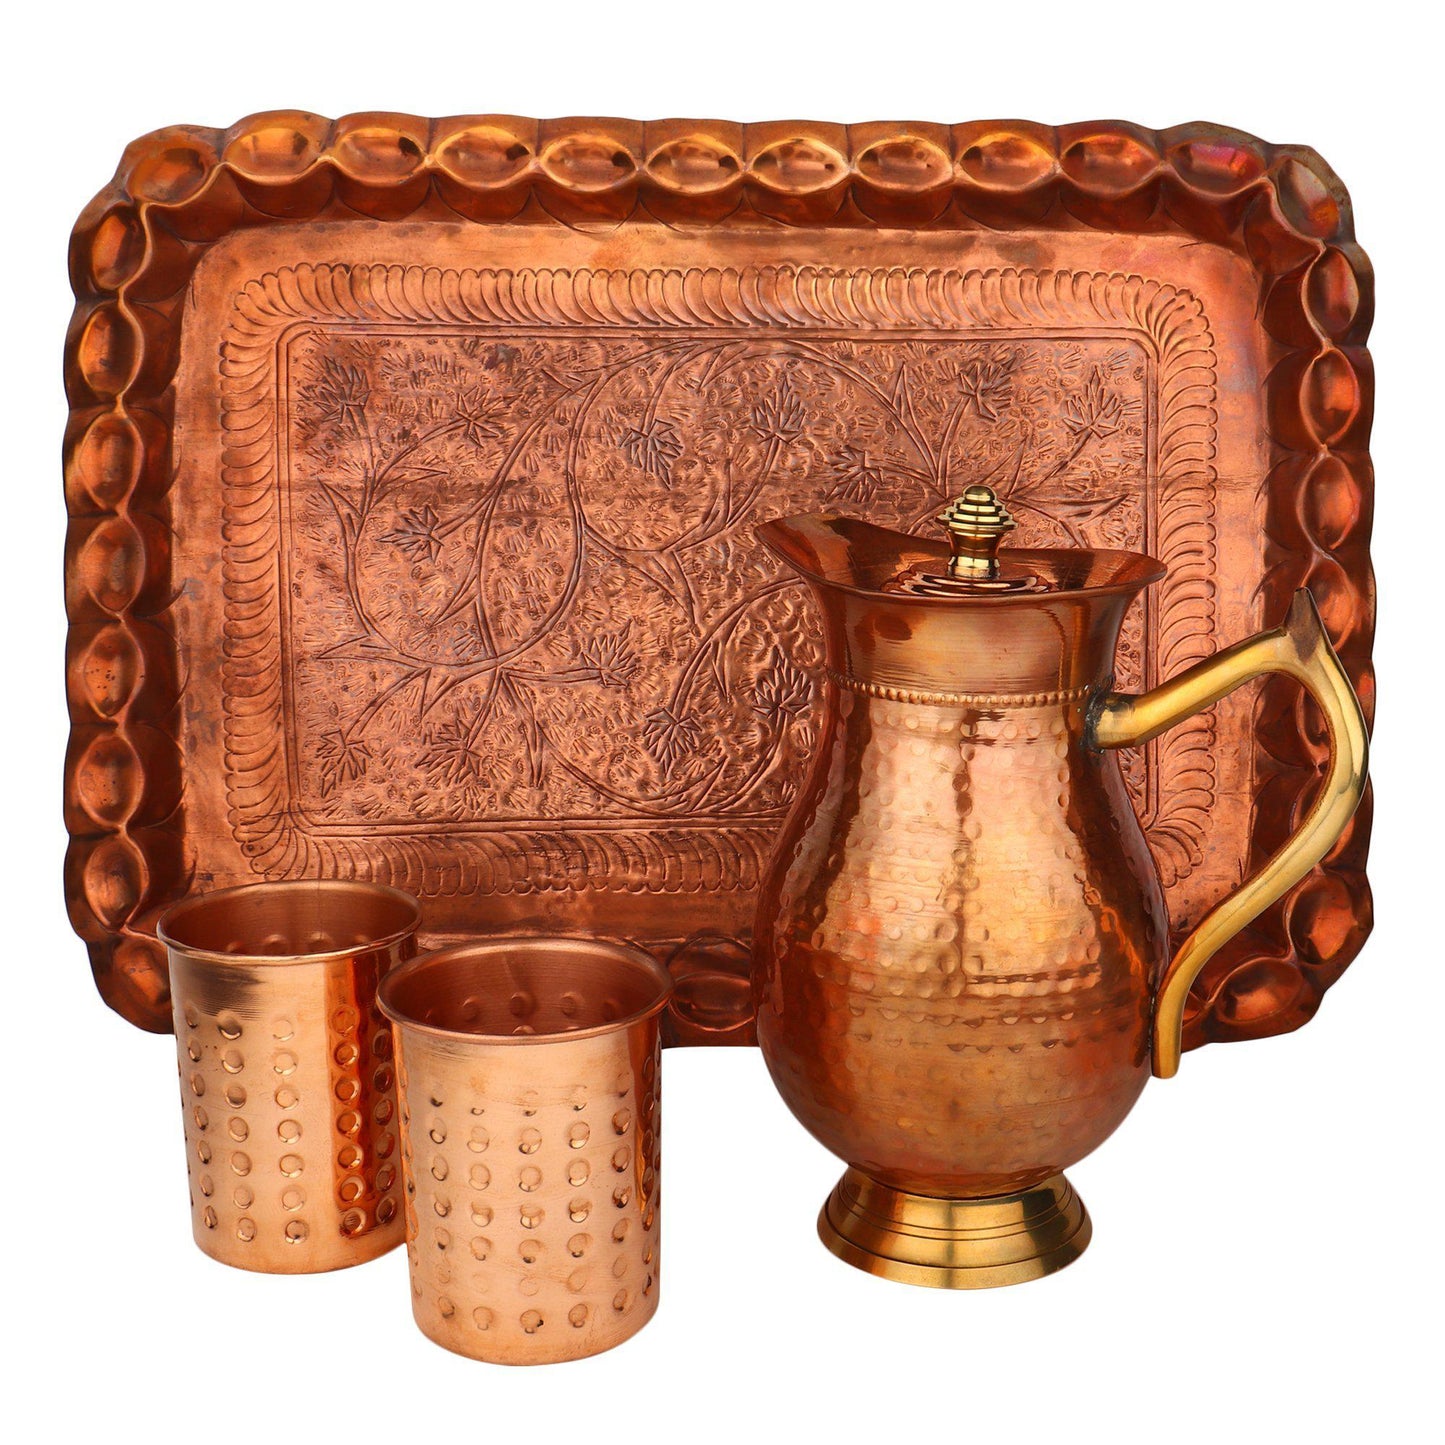 Hammered Style Copper Jug Set With Tray-Copper Jug Set With Tray-ONESKYSHOP